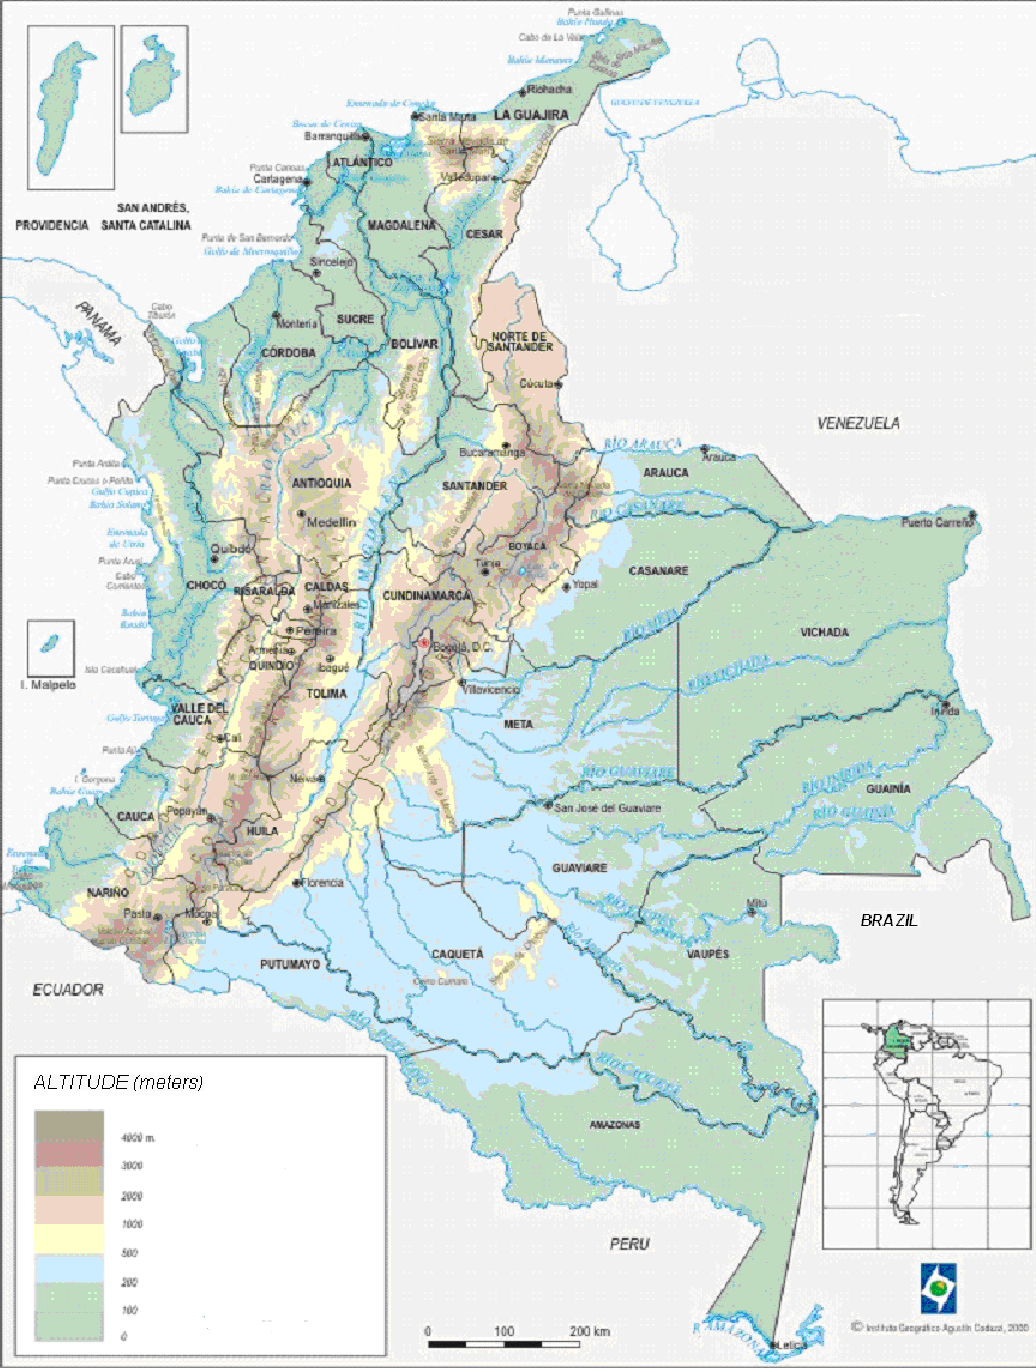 Figure 4 is a map of Colombia that divides its territory into 32 departments.  (Appendix Table 3 contains a full list of Colombia’s departments.)  The map illustrates that the Andes range crosses the country roughly along its north-south axis, dividing the country into four areas:  two low-altitude areas on the seacoasts of the Pacific Ocean and the Caribbean Sea; one high-altitude region on the Andes Mountains from the southwestern limit with Ecuador to the northeastern limit with Venezuela; and one low-altitude region of tropical rain forests close to the basins of the Amazon and Orinoco rivers.  The most populous cities in Colombia are located in the Andean region and the Caribbean seacoast.  For the statistical analysis in the paper, we exclude the archipelago of San Andres-Providencia on the Caribbean Sea, and we consider the capital district of Bogota as a separate department.  